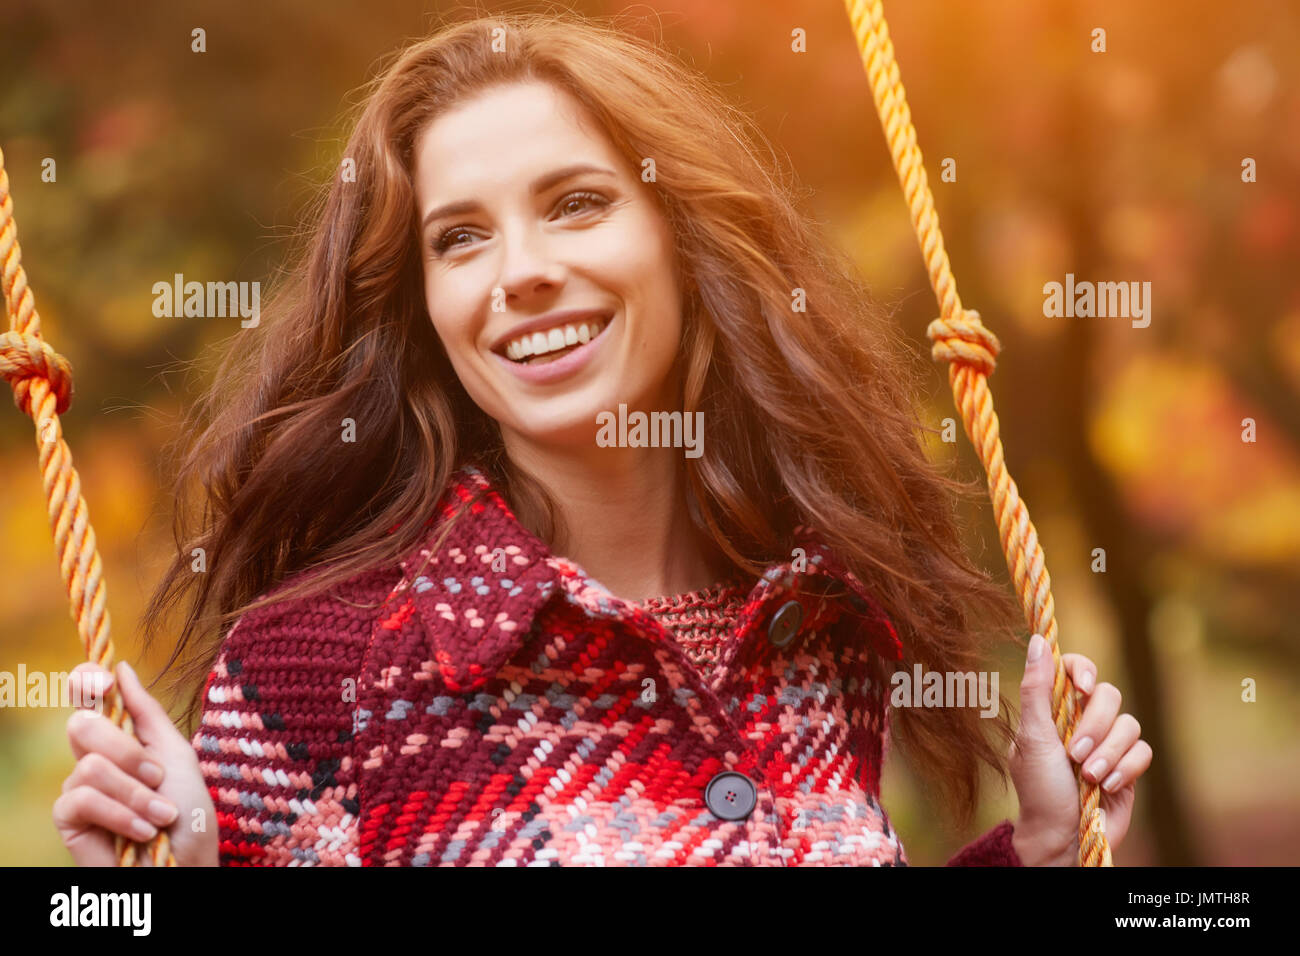 Woman on a swing in an autumn park Stock Photo